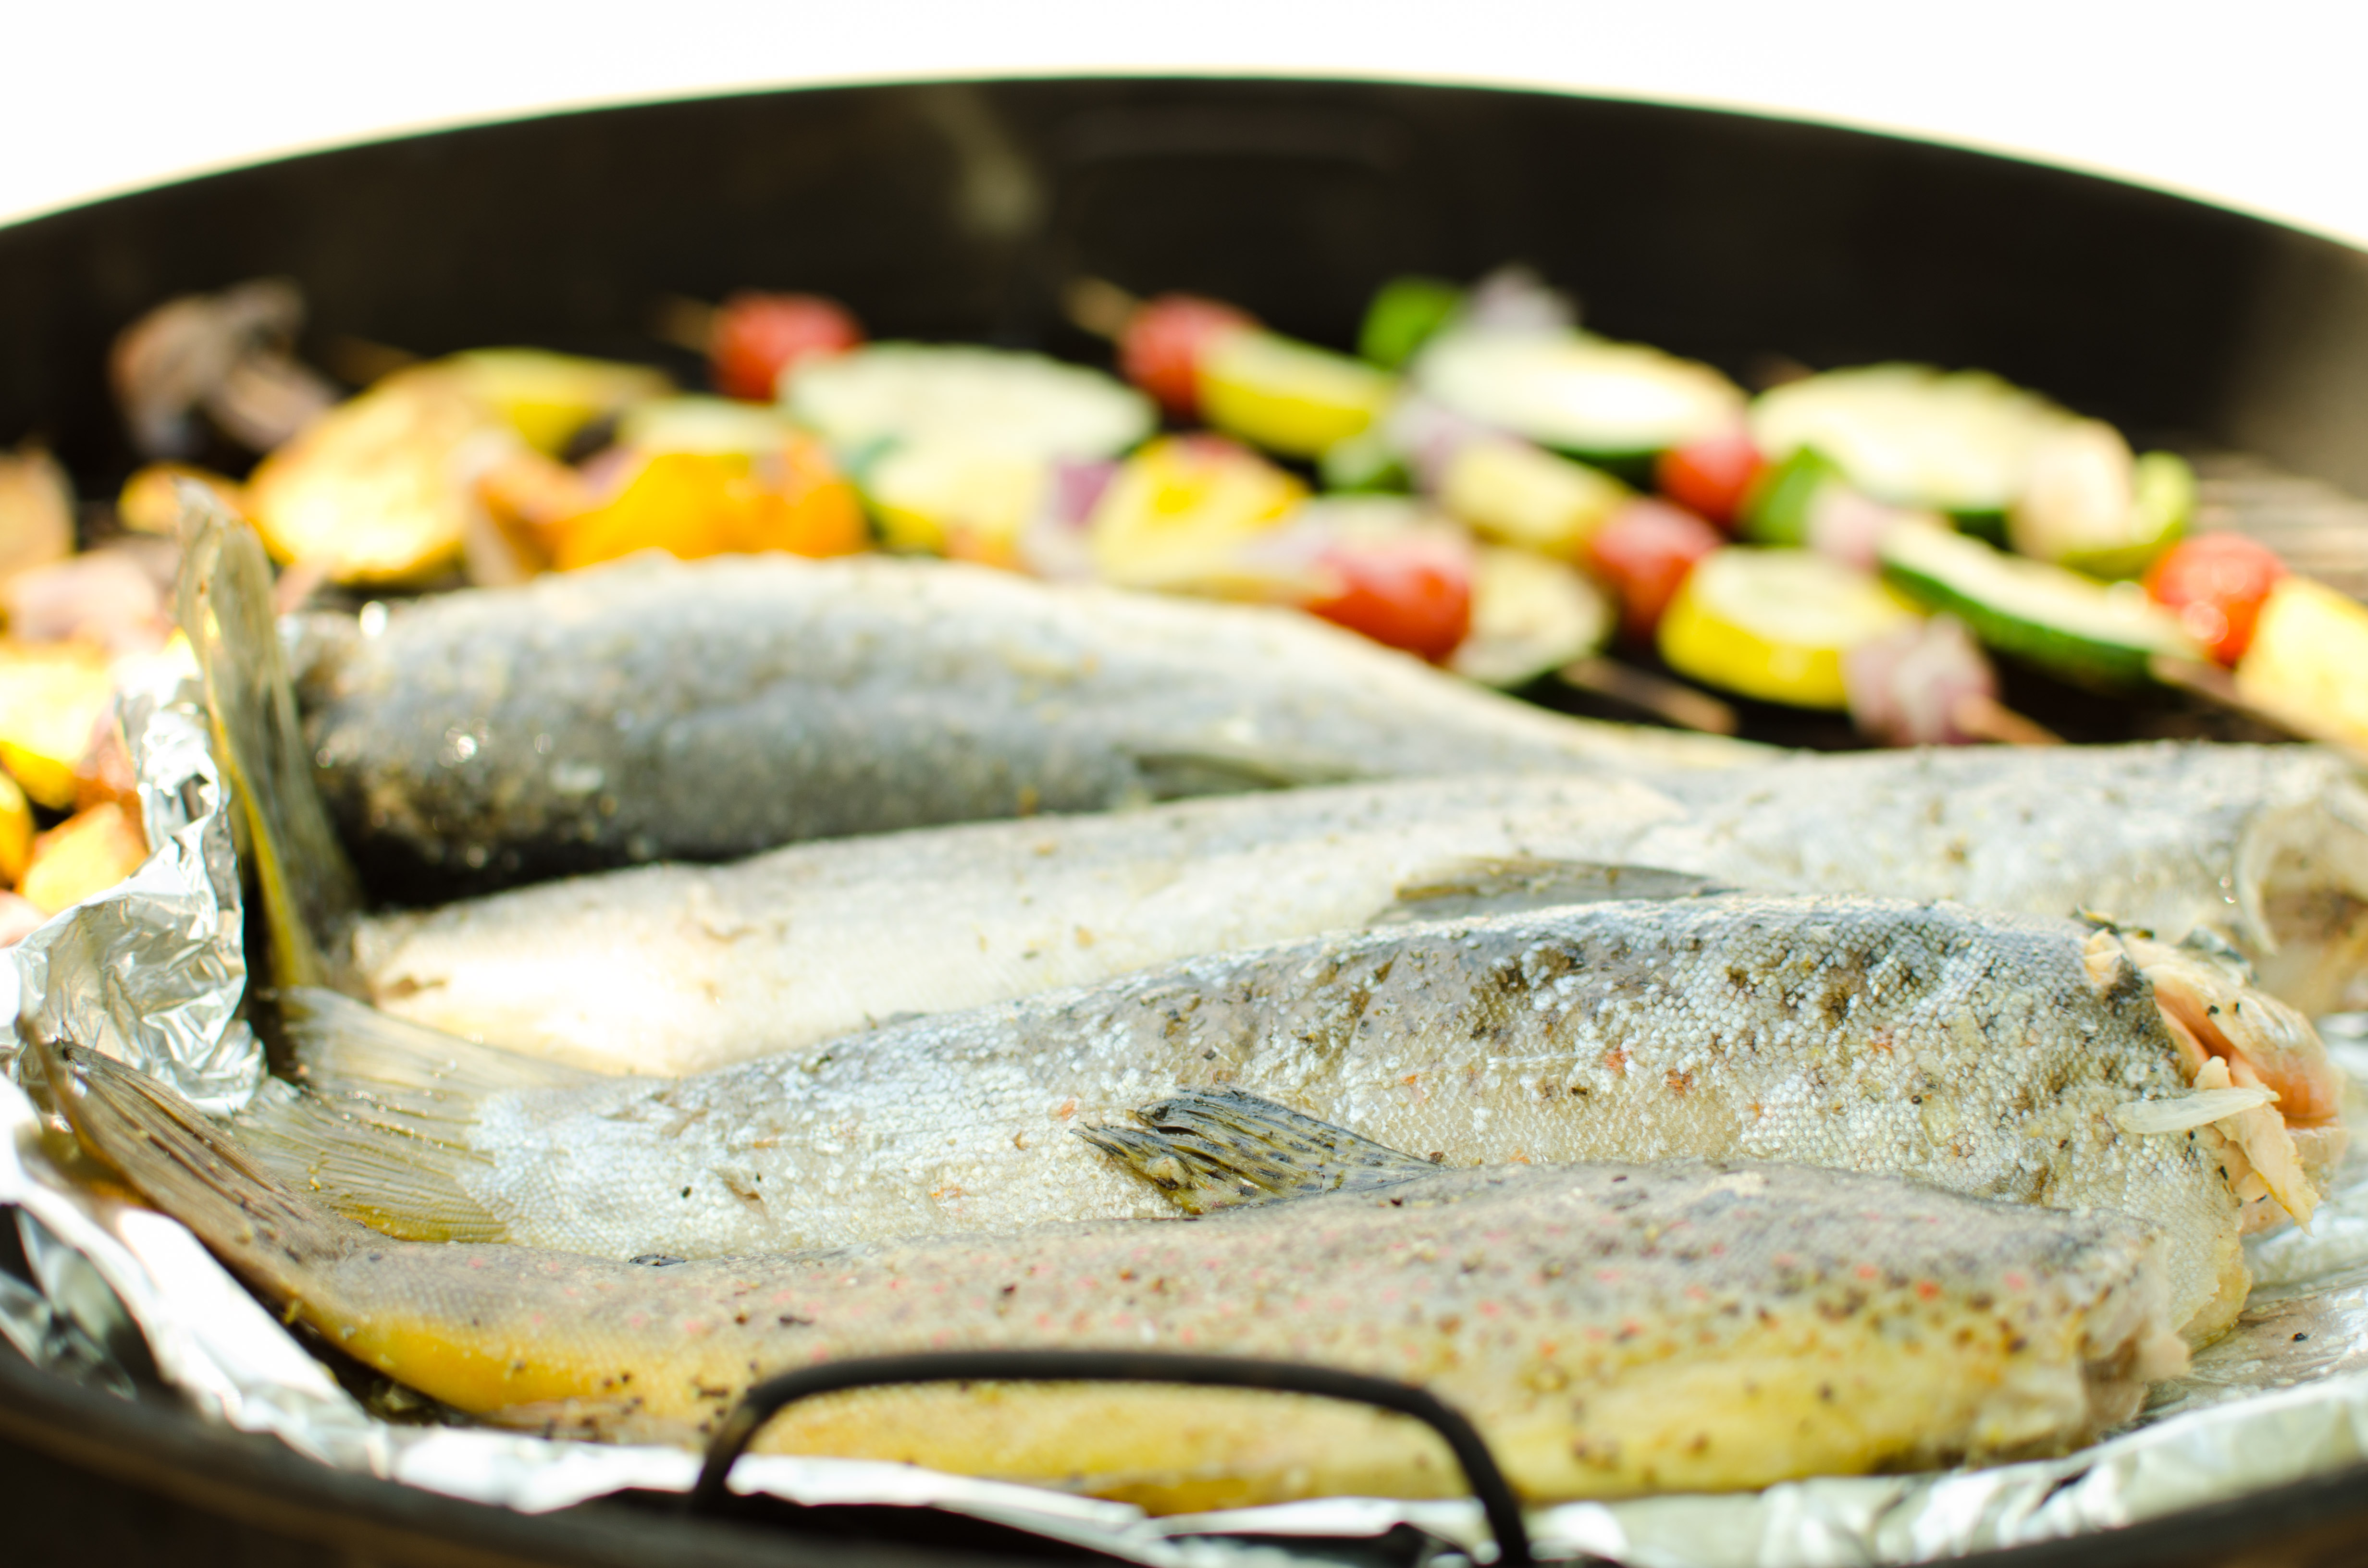 Trout on the grill.